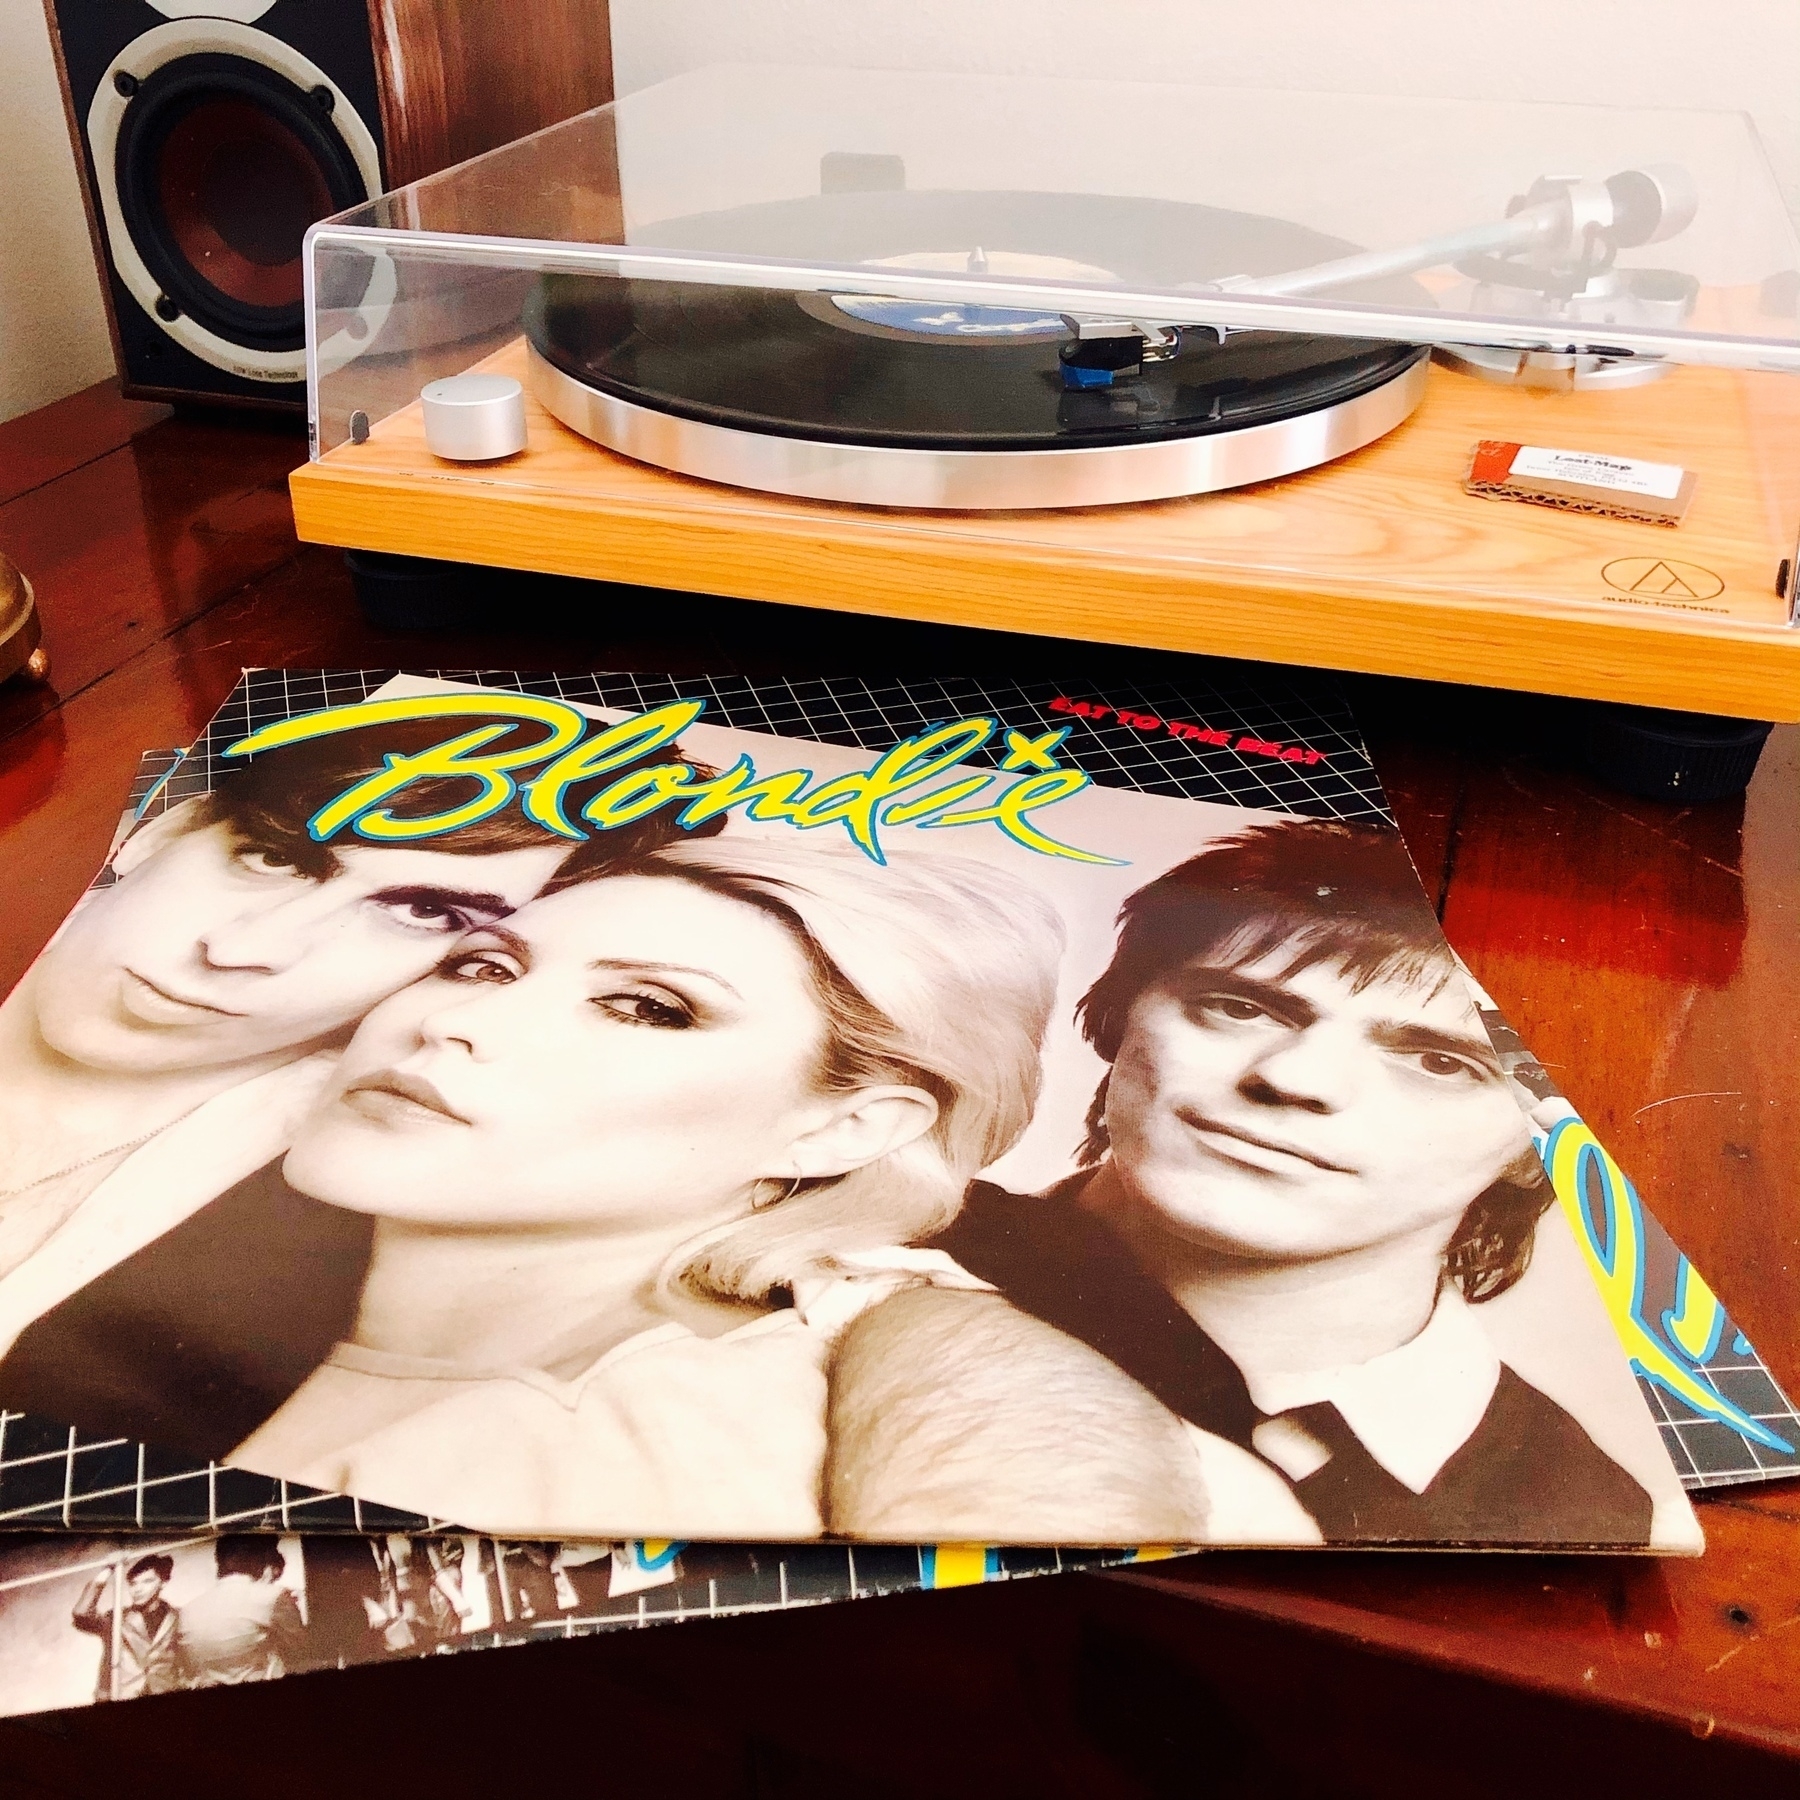 Blondie album Eat to the Beat on a record player